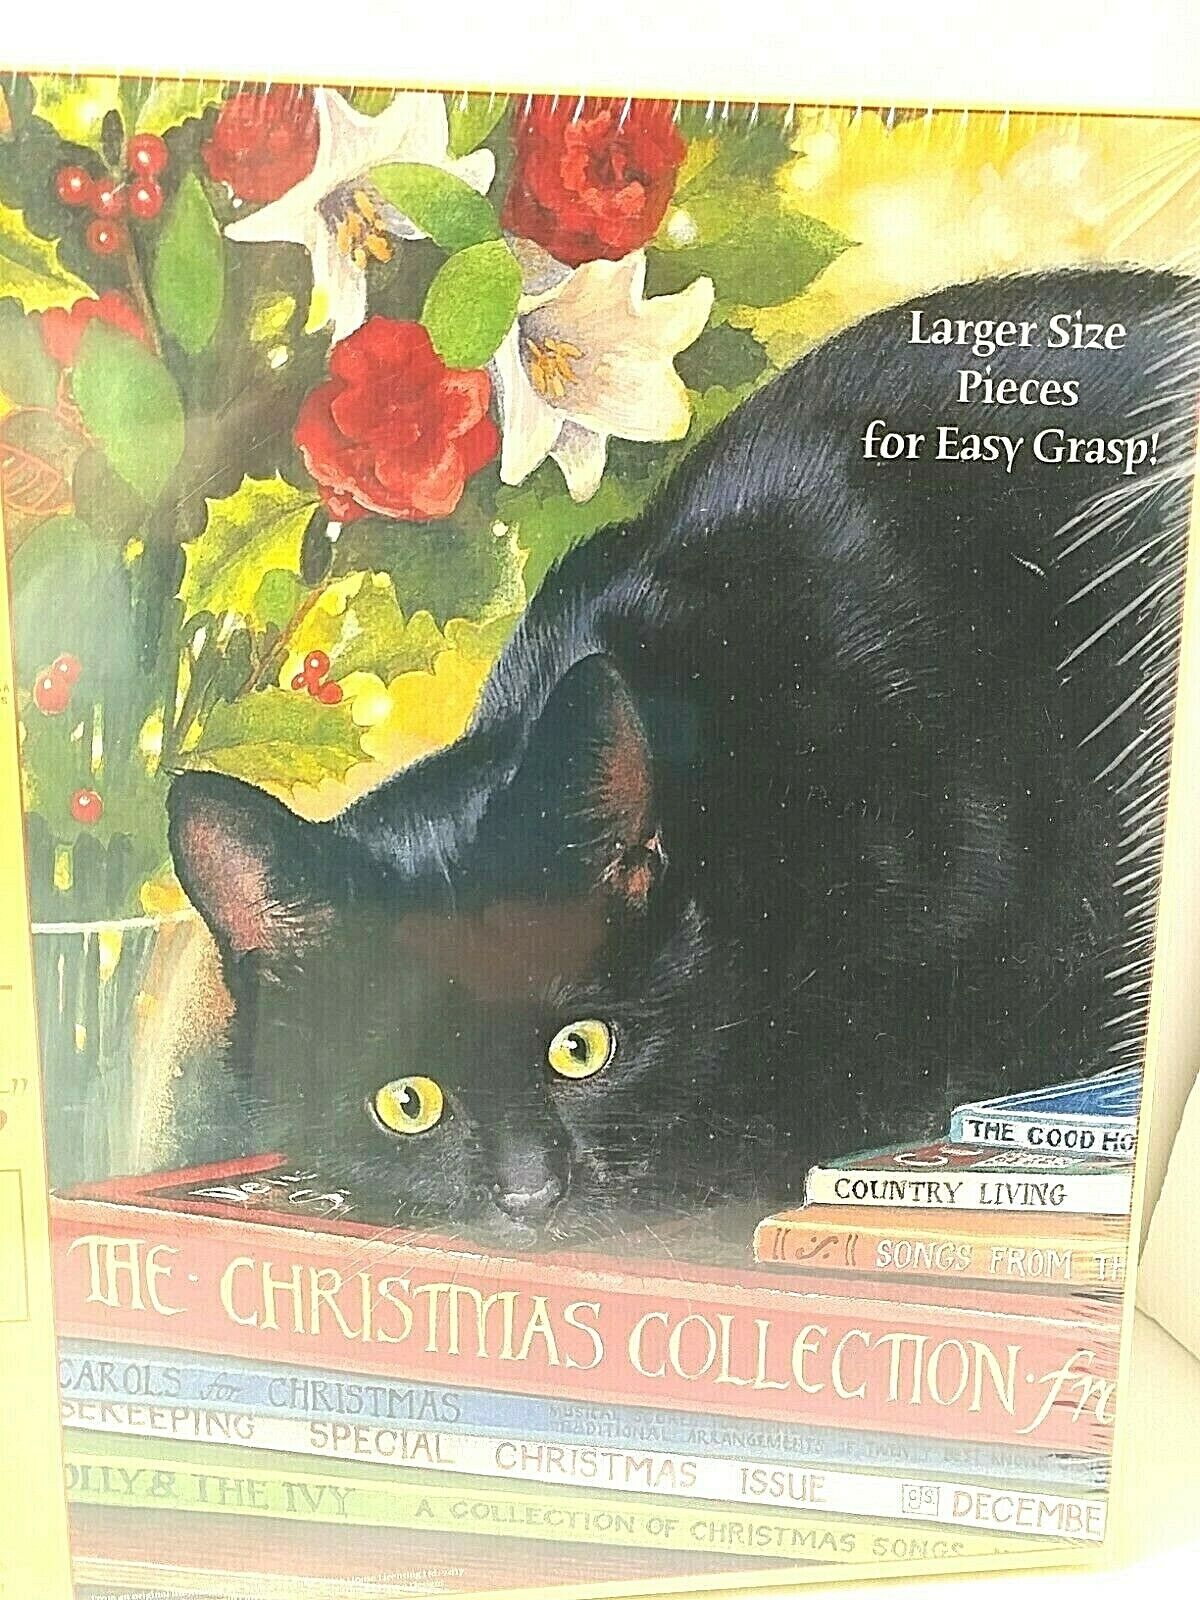 NEW Easy Grasp Puzzle Black Cat 500 pc CHRISTMAS COLLECTION Sealed Snelling 